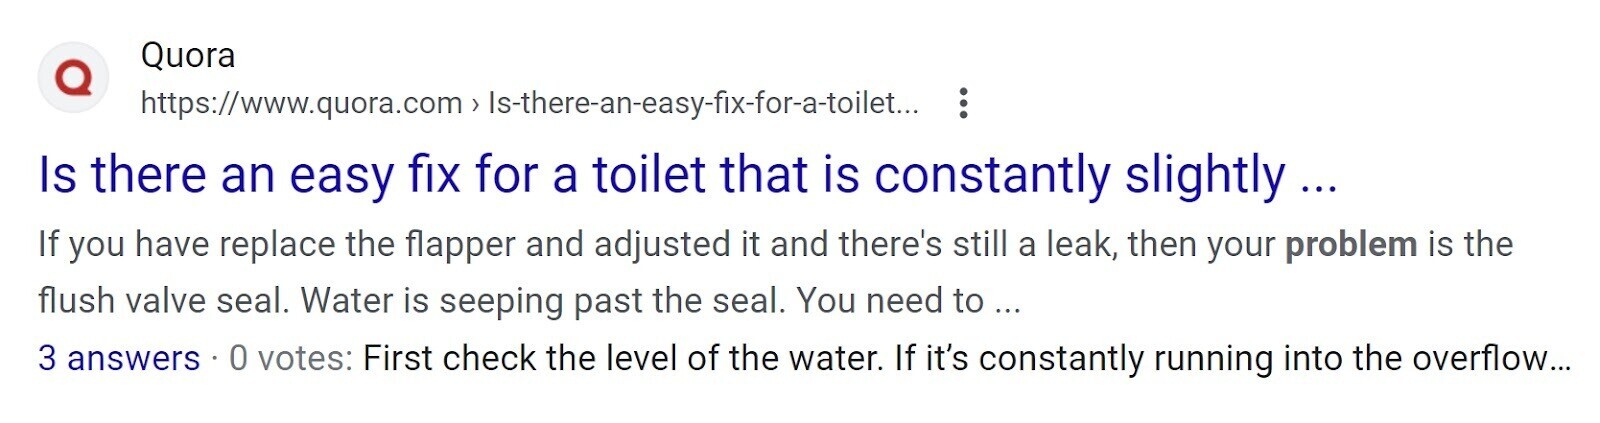 Quora's page ranking third for “how to fix running toilet” in Google